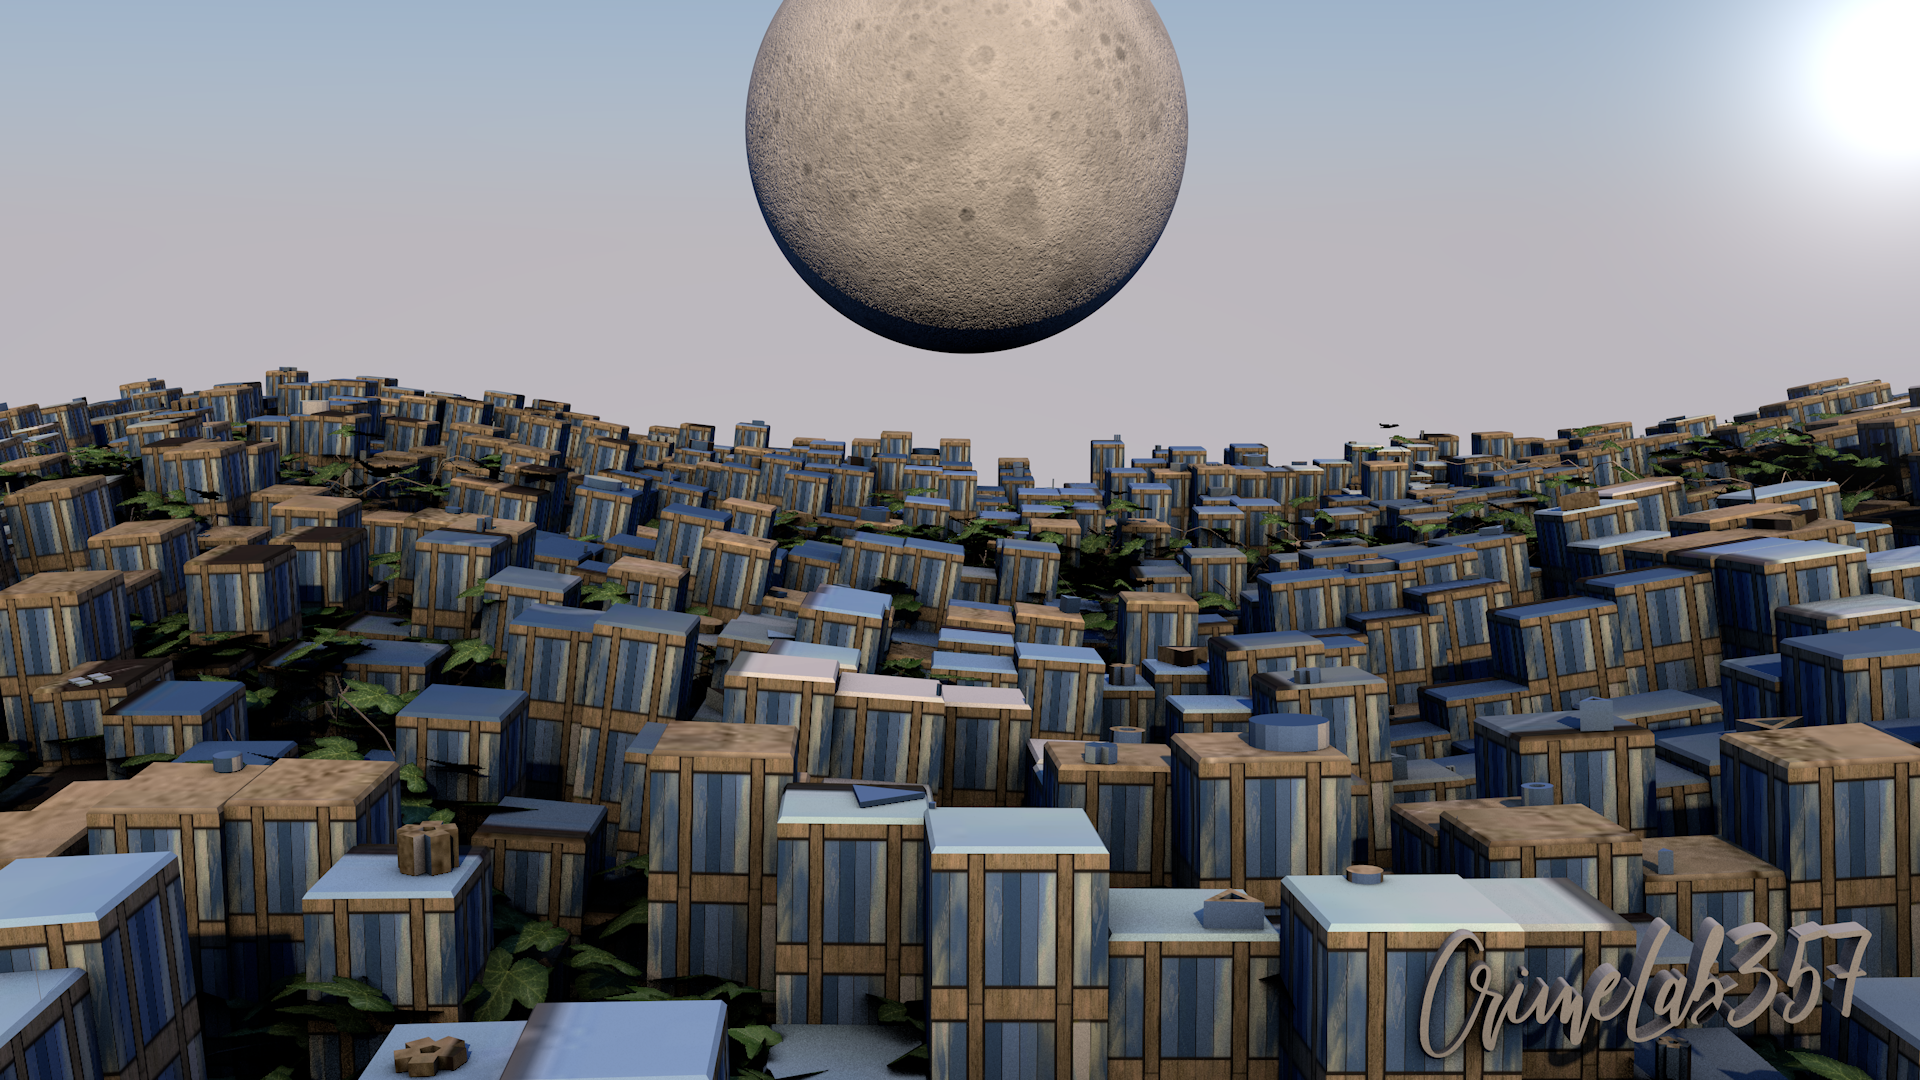 General 1920x1080 city space art 3D Abstract abstract planet